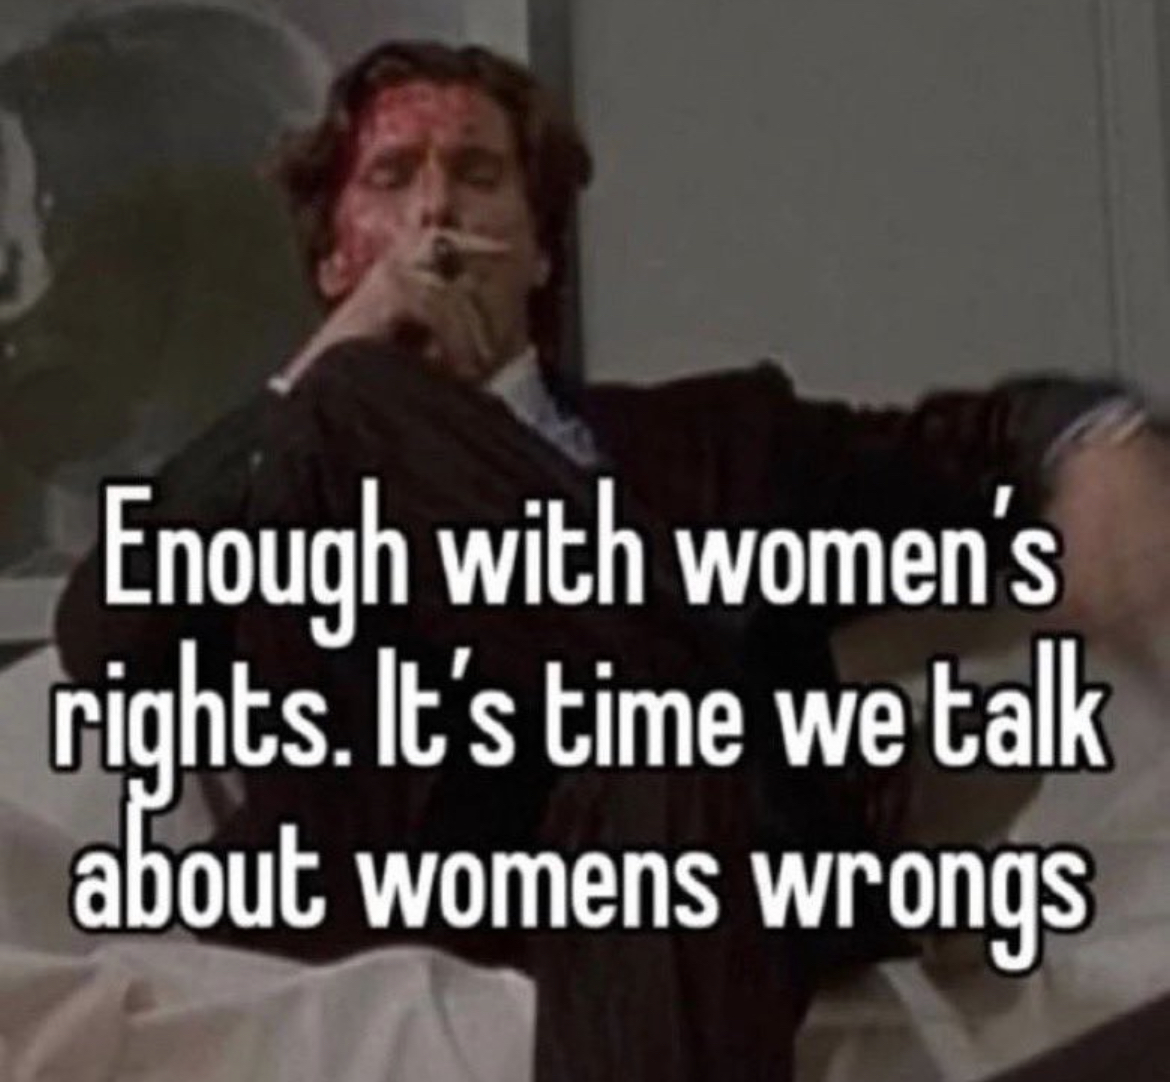 memes and quotes that speak truth - photo caption - Enough with women's rights. It's time we talk about womens wrongs